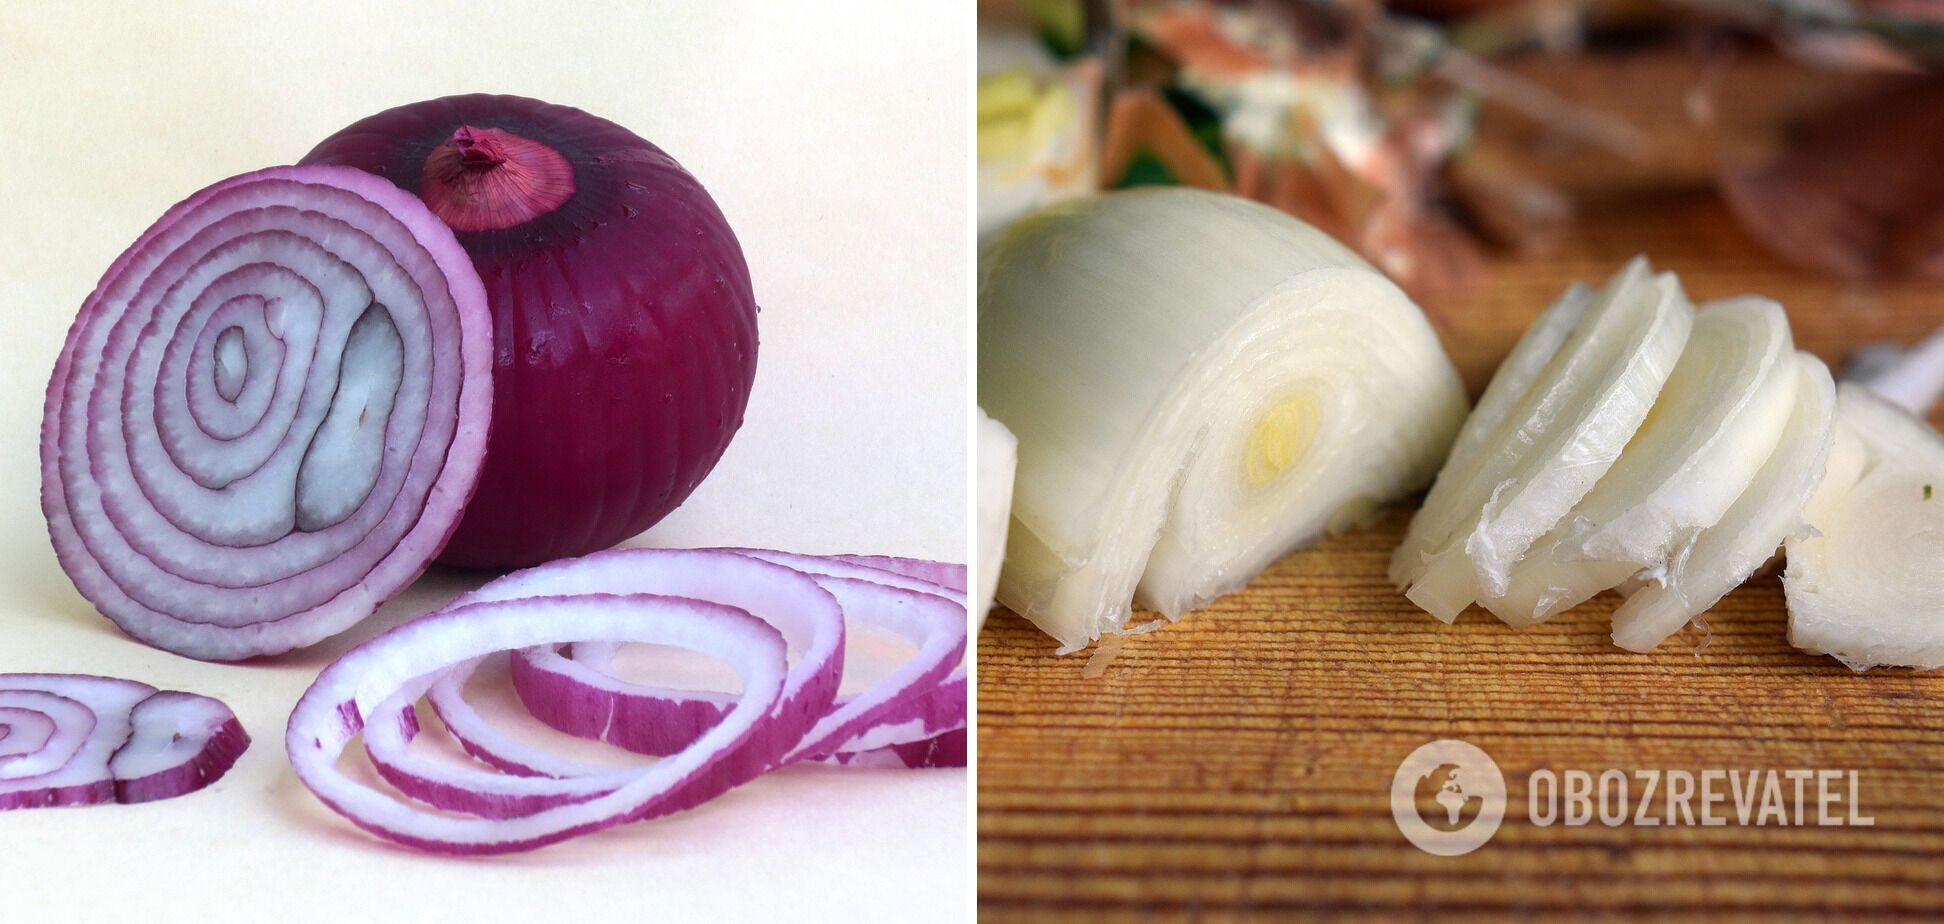 How to cut onions quickly